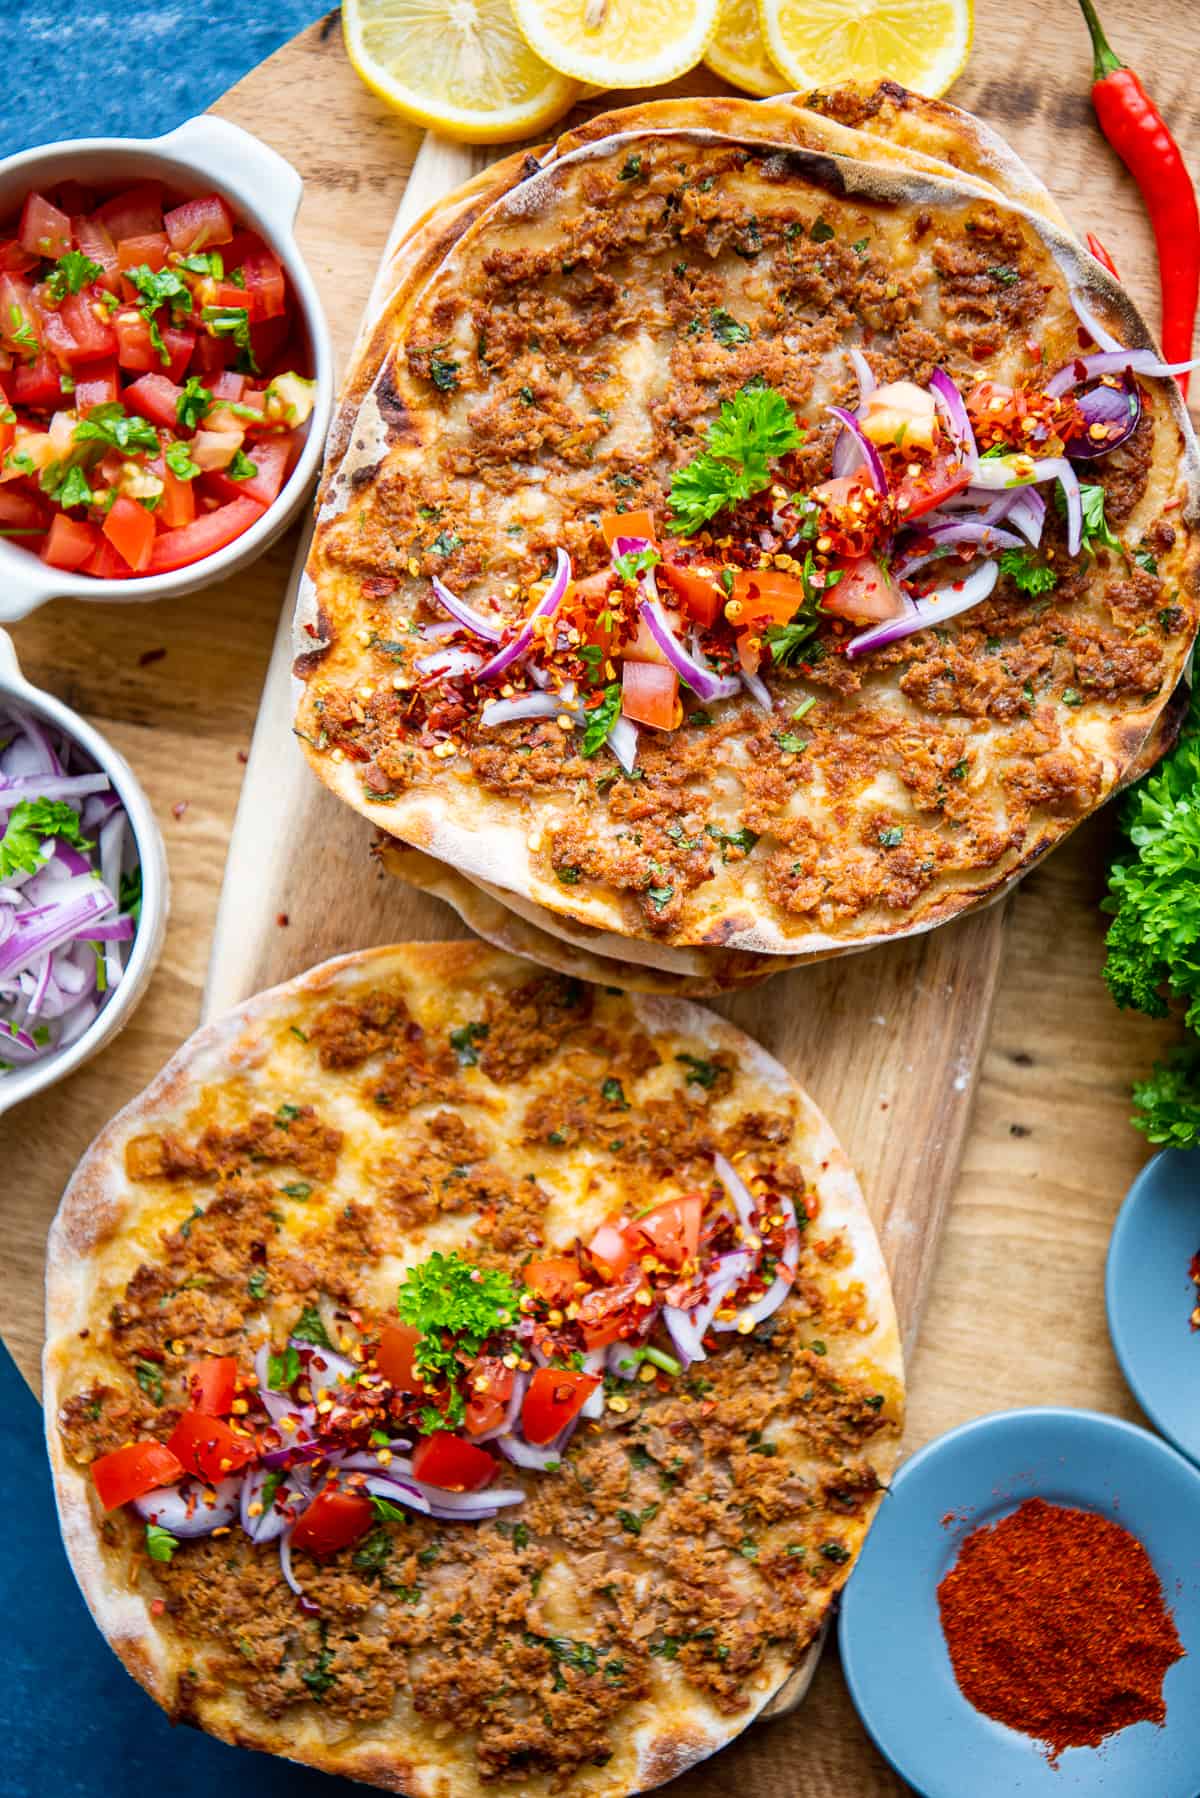 Lahmacun topped with salad accompanied by sliced onions and tomato salad on the side.